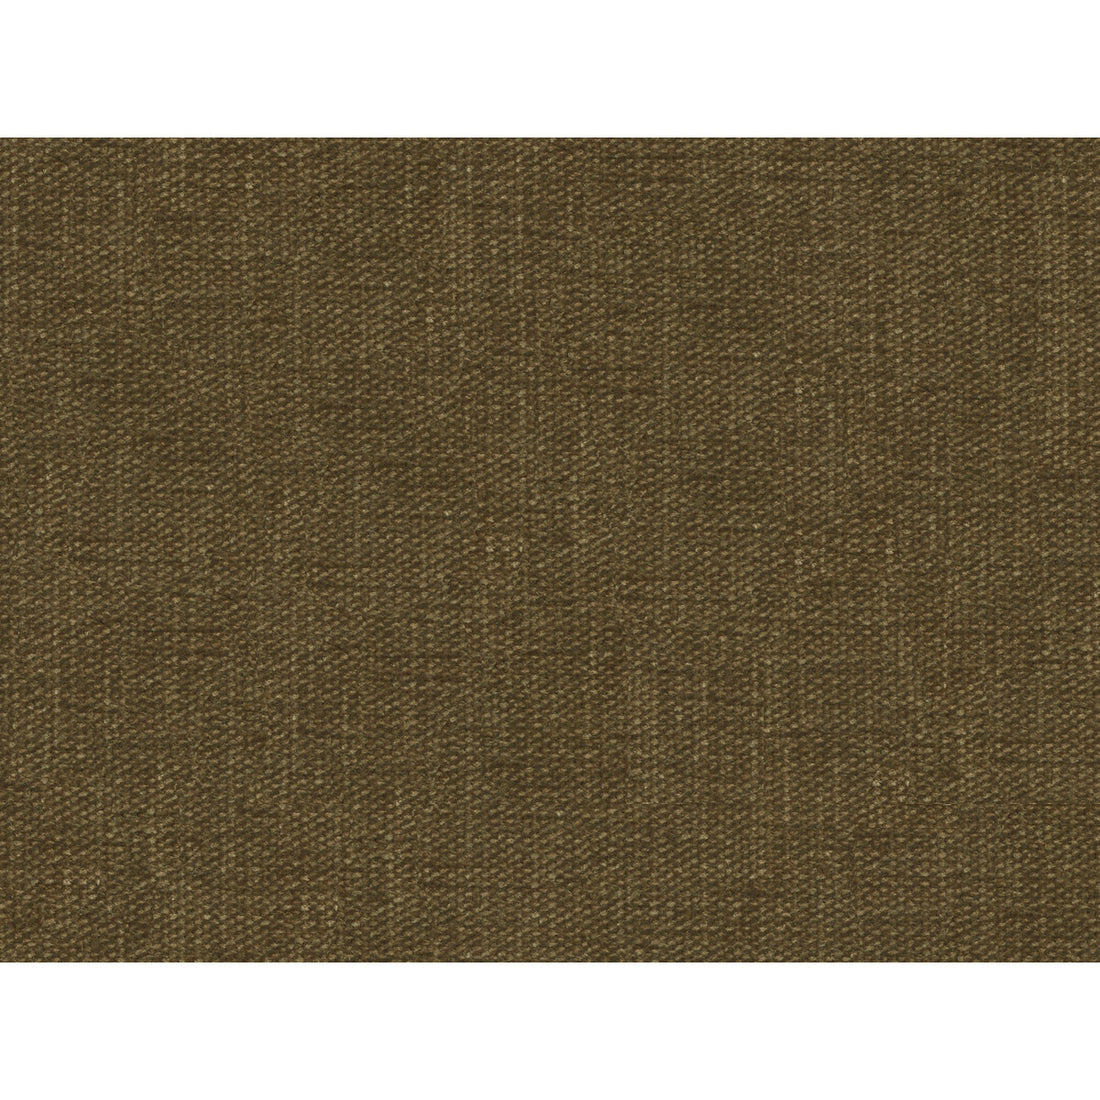 Kravet Contract fabric in 34961-106 color - pattern 34961.106.0 - by Kravet Contract in the Performance Kravetarmor collection